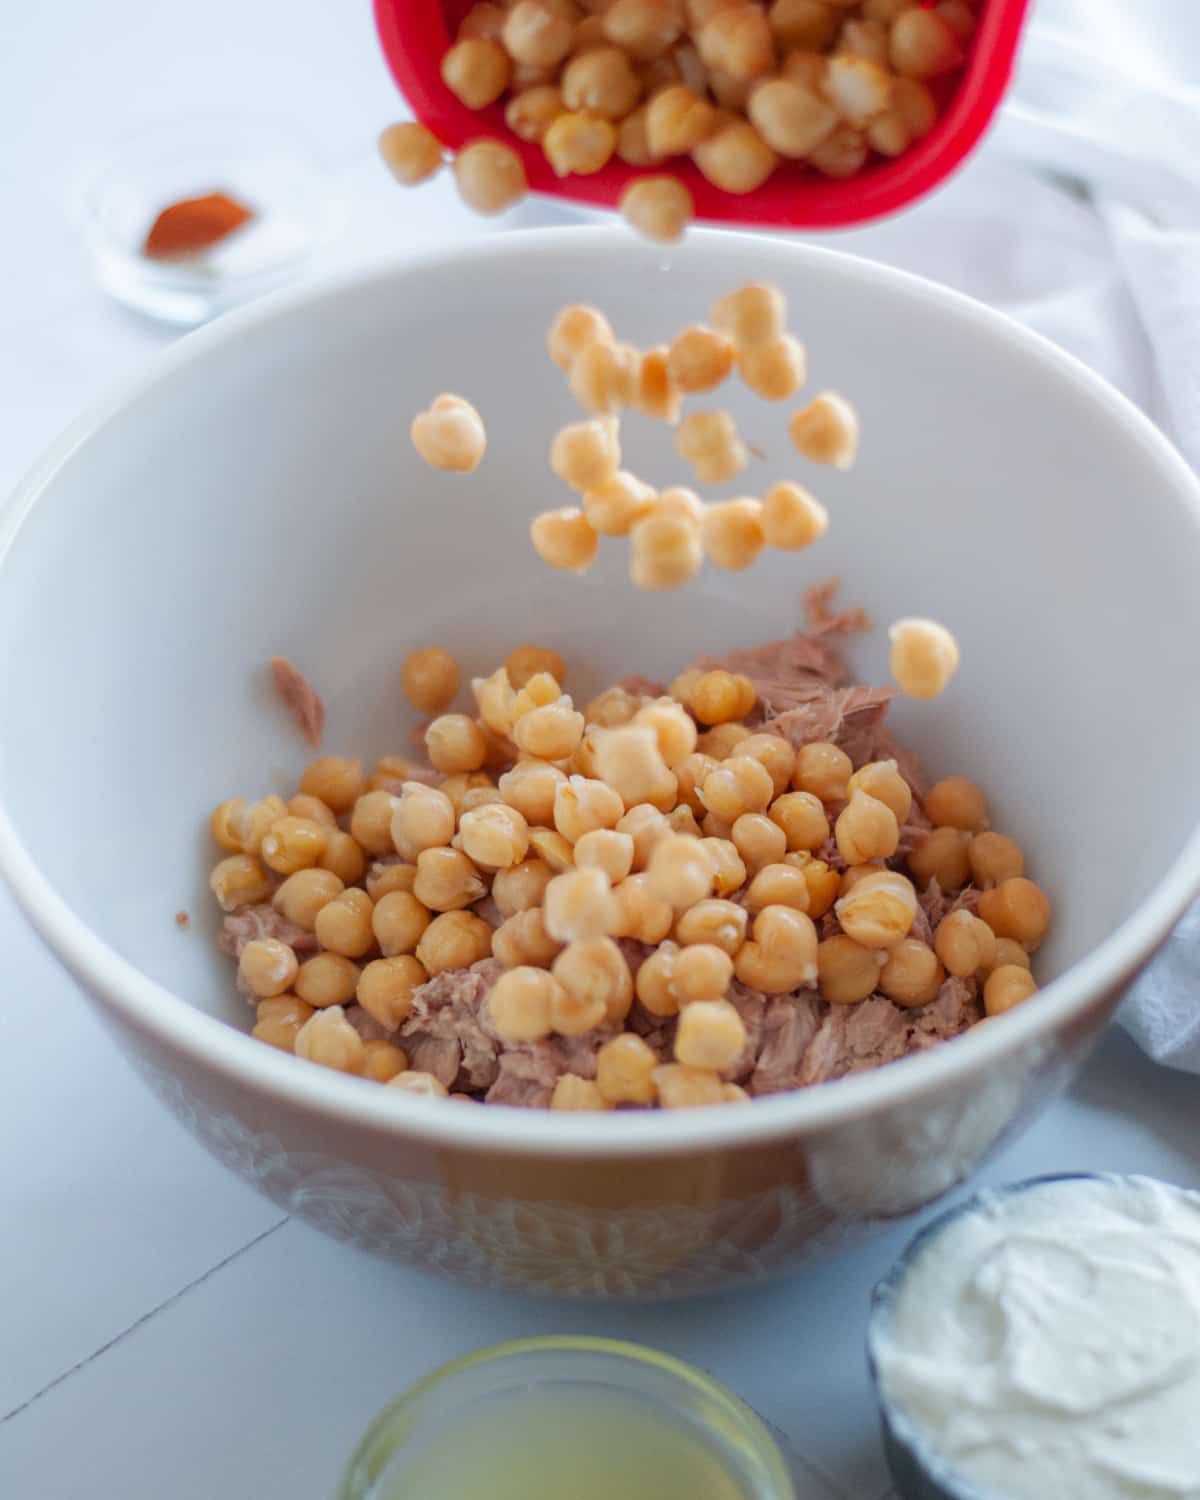 process shot showing how to make Healthy Tuna Salad without Mayo. This shot shows drained and rinsed chickpeas being added to chunk light tuna in a mixing bowl.